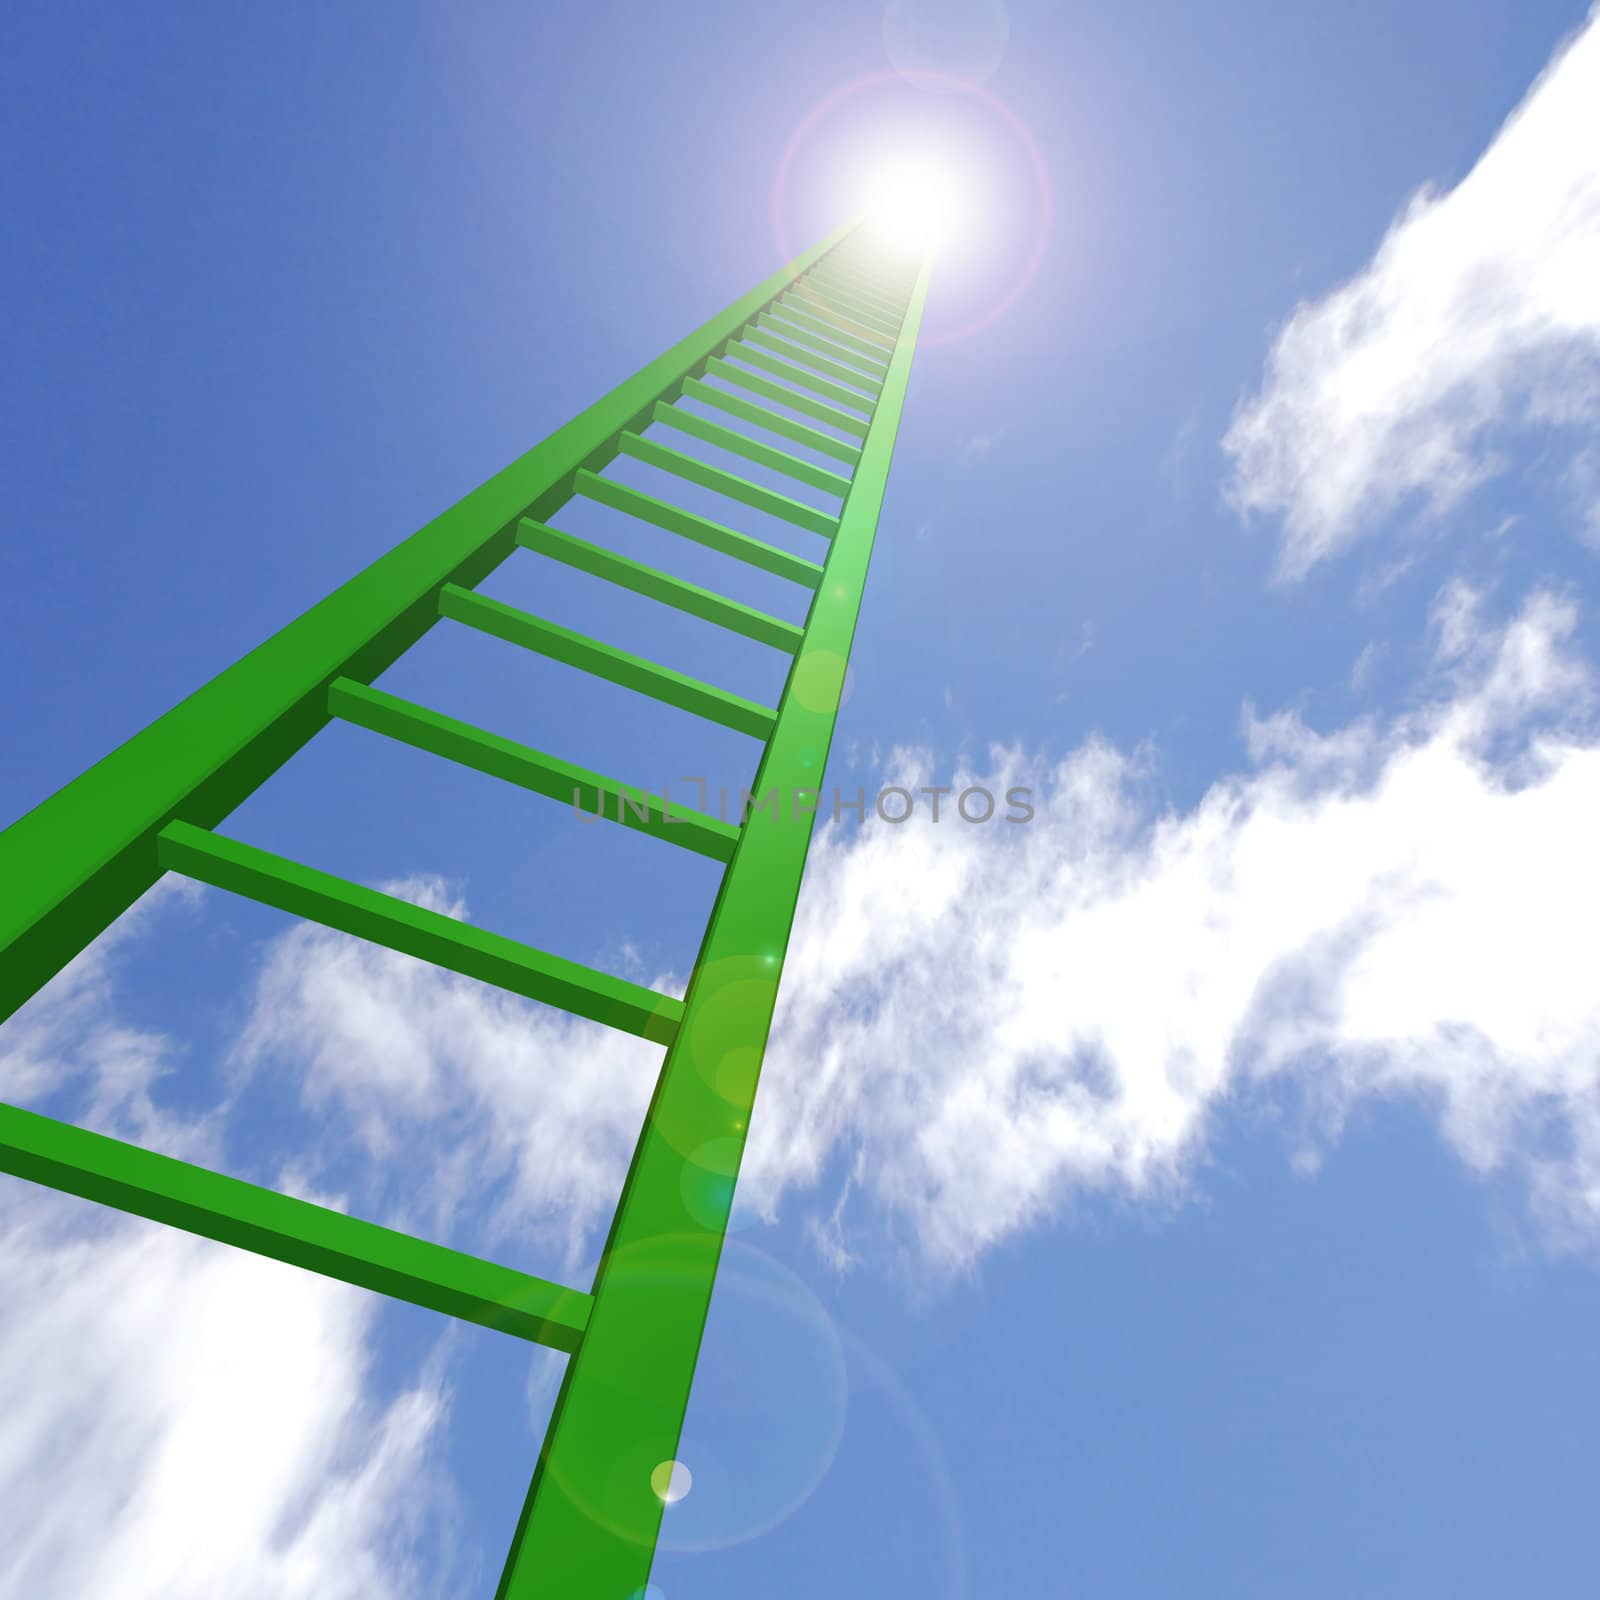 A green ladder reaching up to the sky.